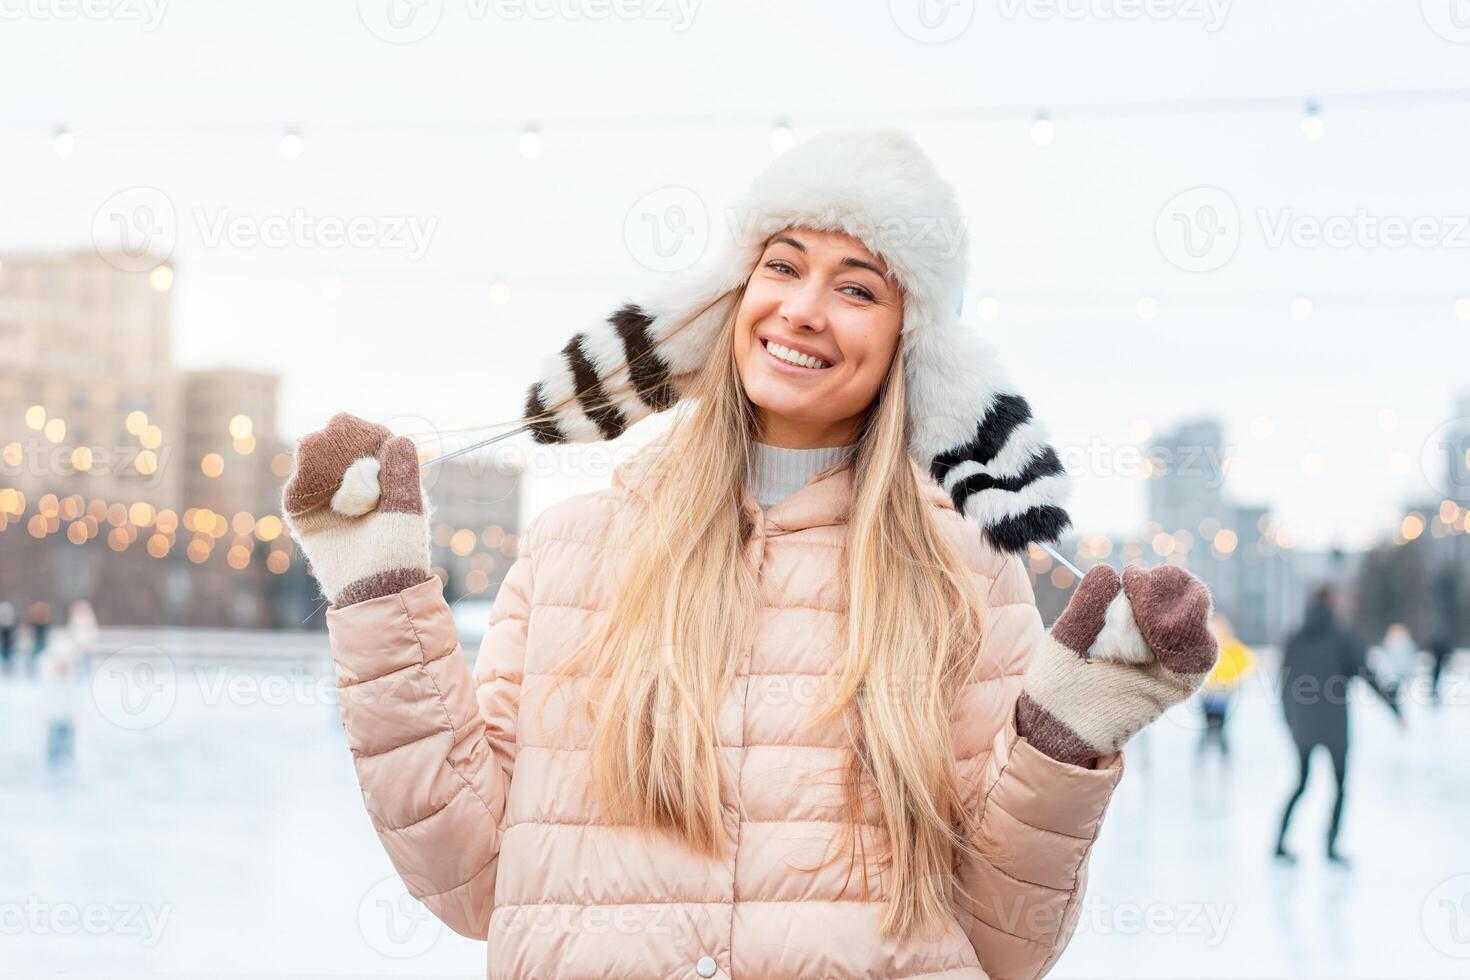 Beautiful lovely middle-aged girl blonde hair warm winter jackets knitted glove stands ice rink background Town Square. Christmas mood lifestyle photo